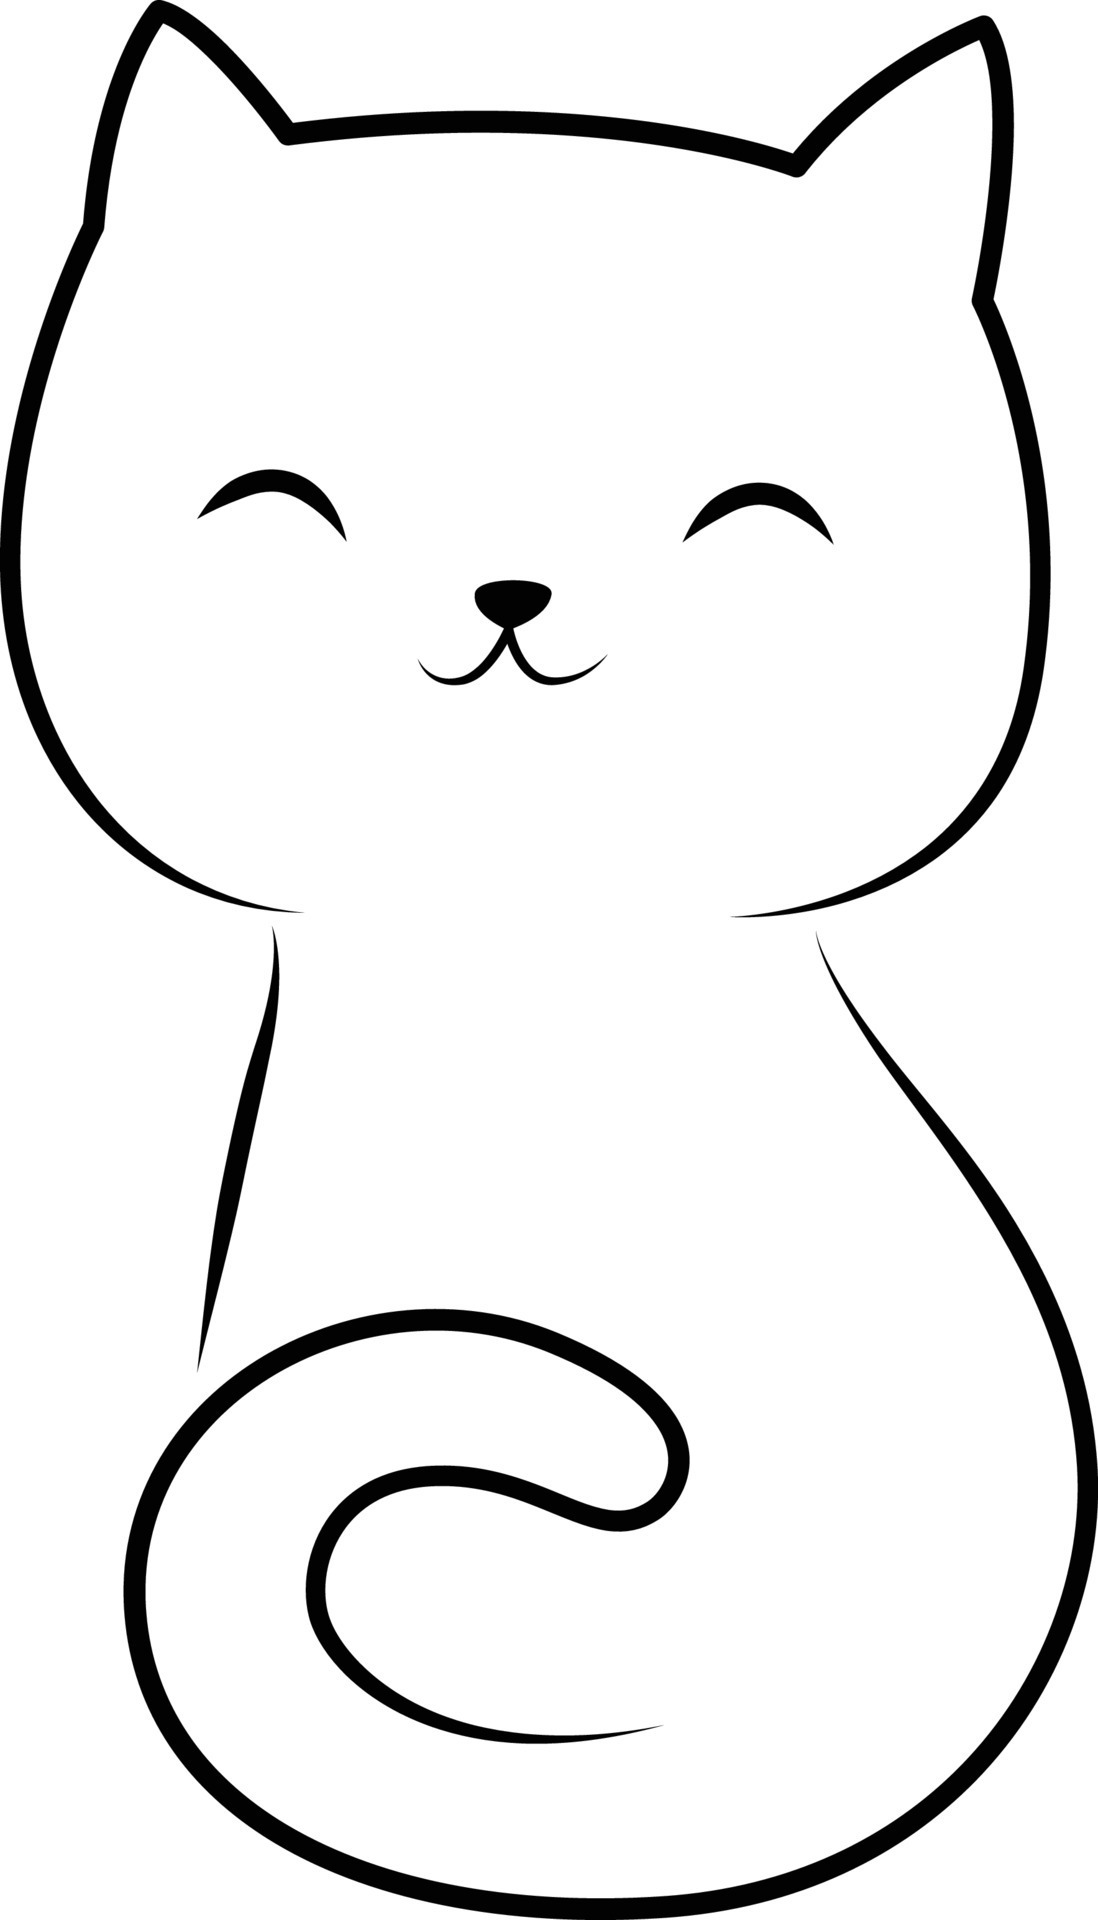 How To Draw A Cute Kitten Face Tabby Cat Face Drawing CC - Dailymotion Video-saigonsouth.com.vn